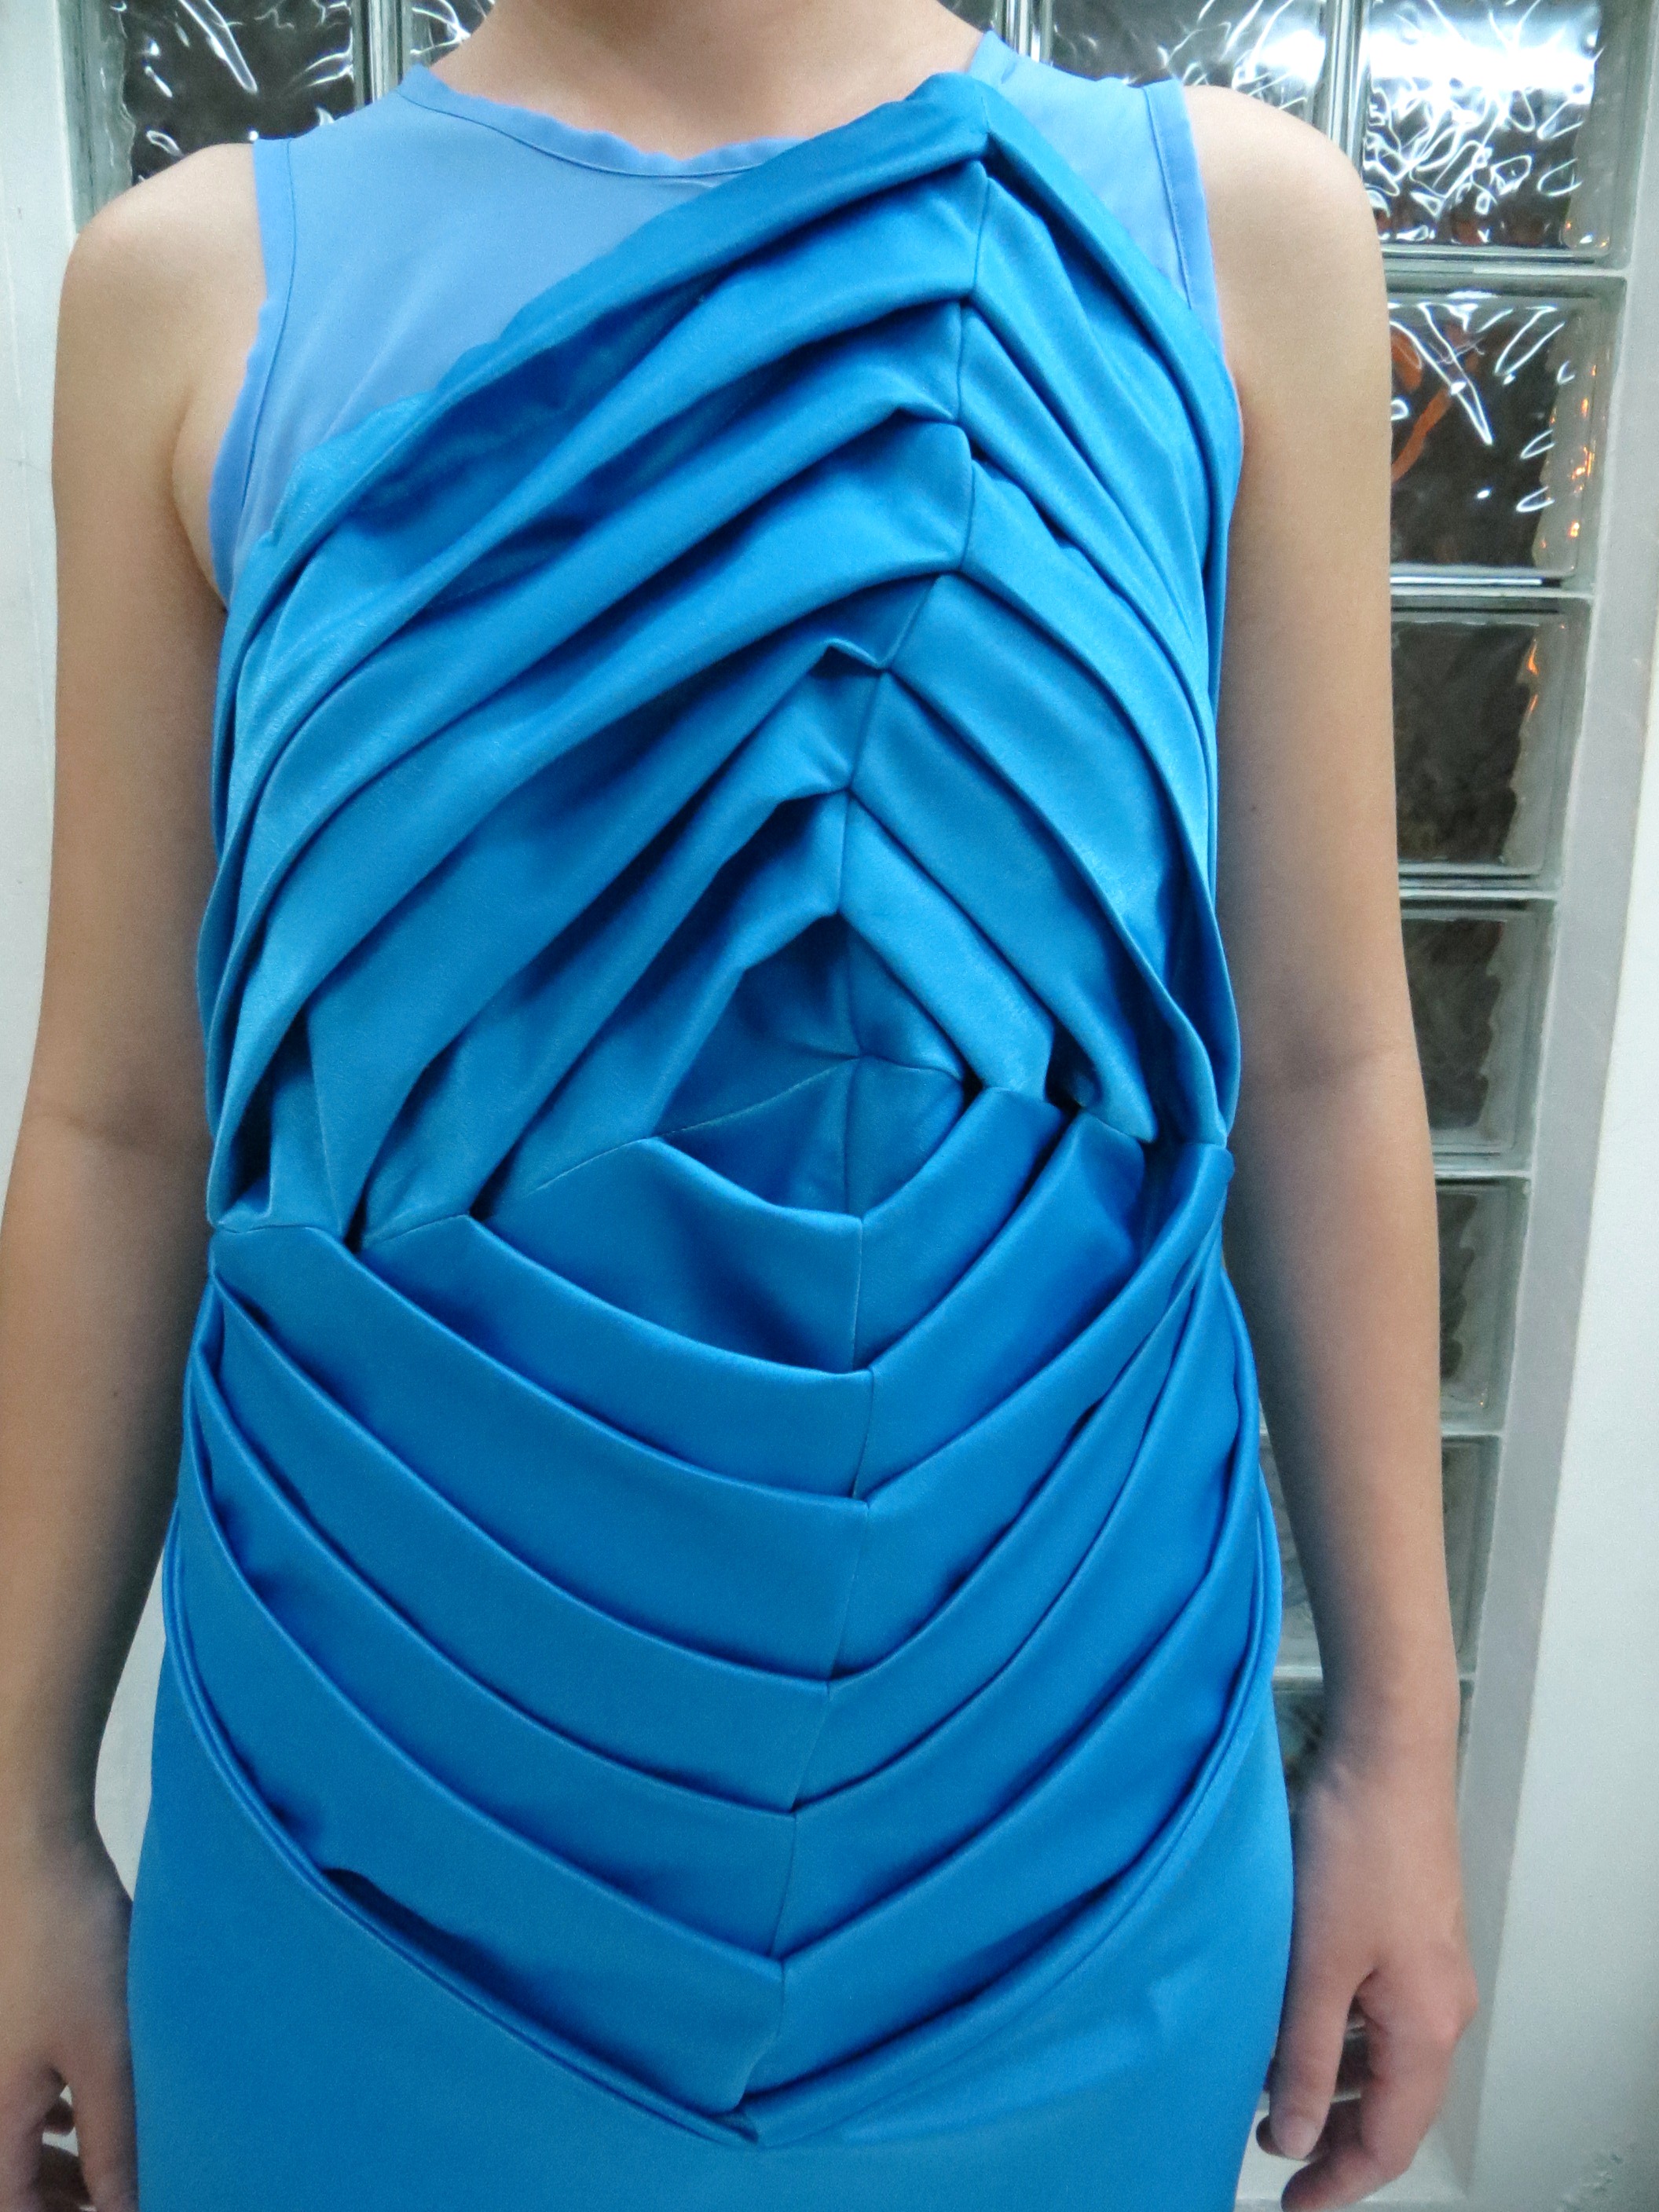 TR Origami Dress – Sewing Projects | BurdaStyle.com